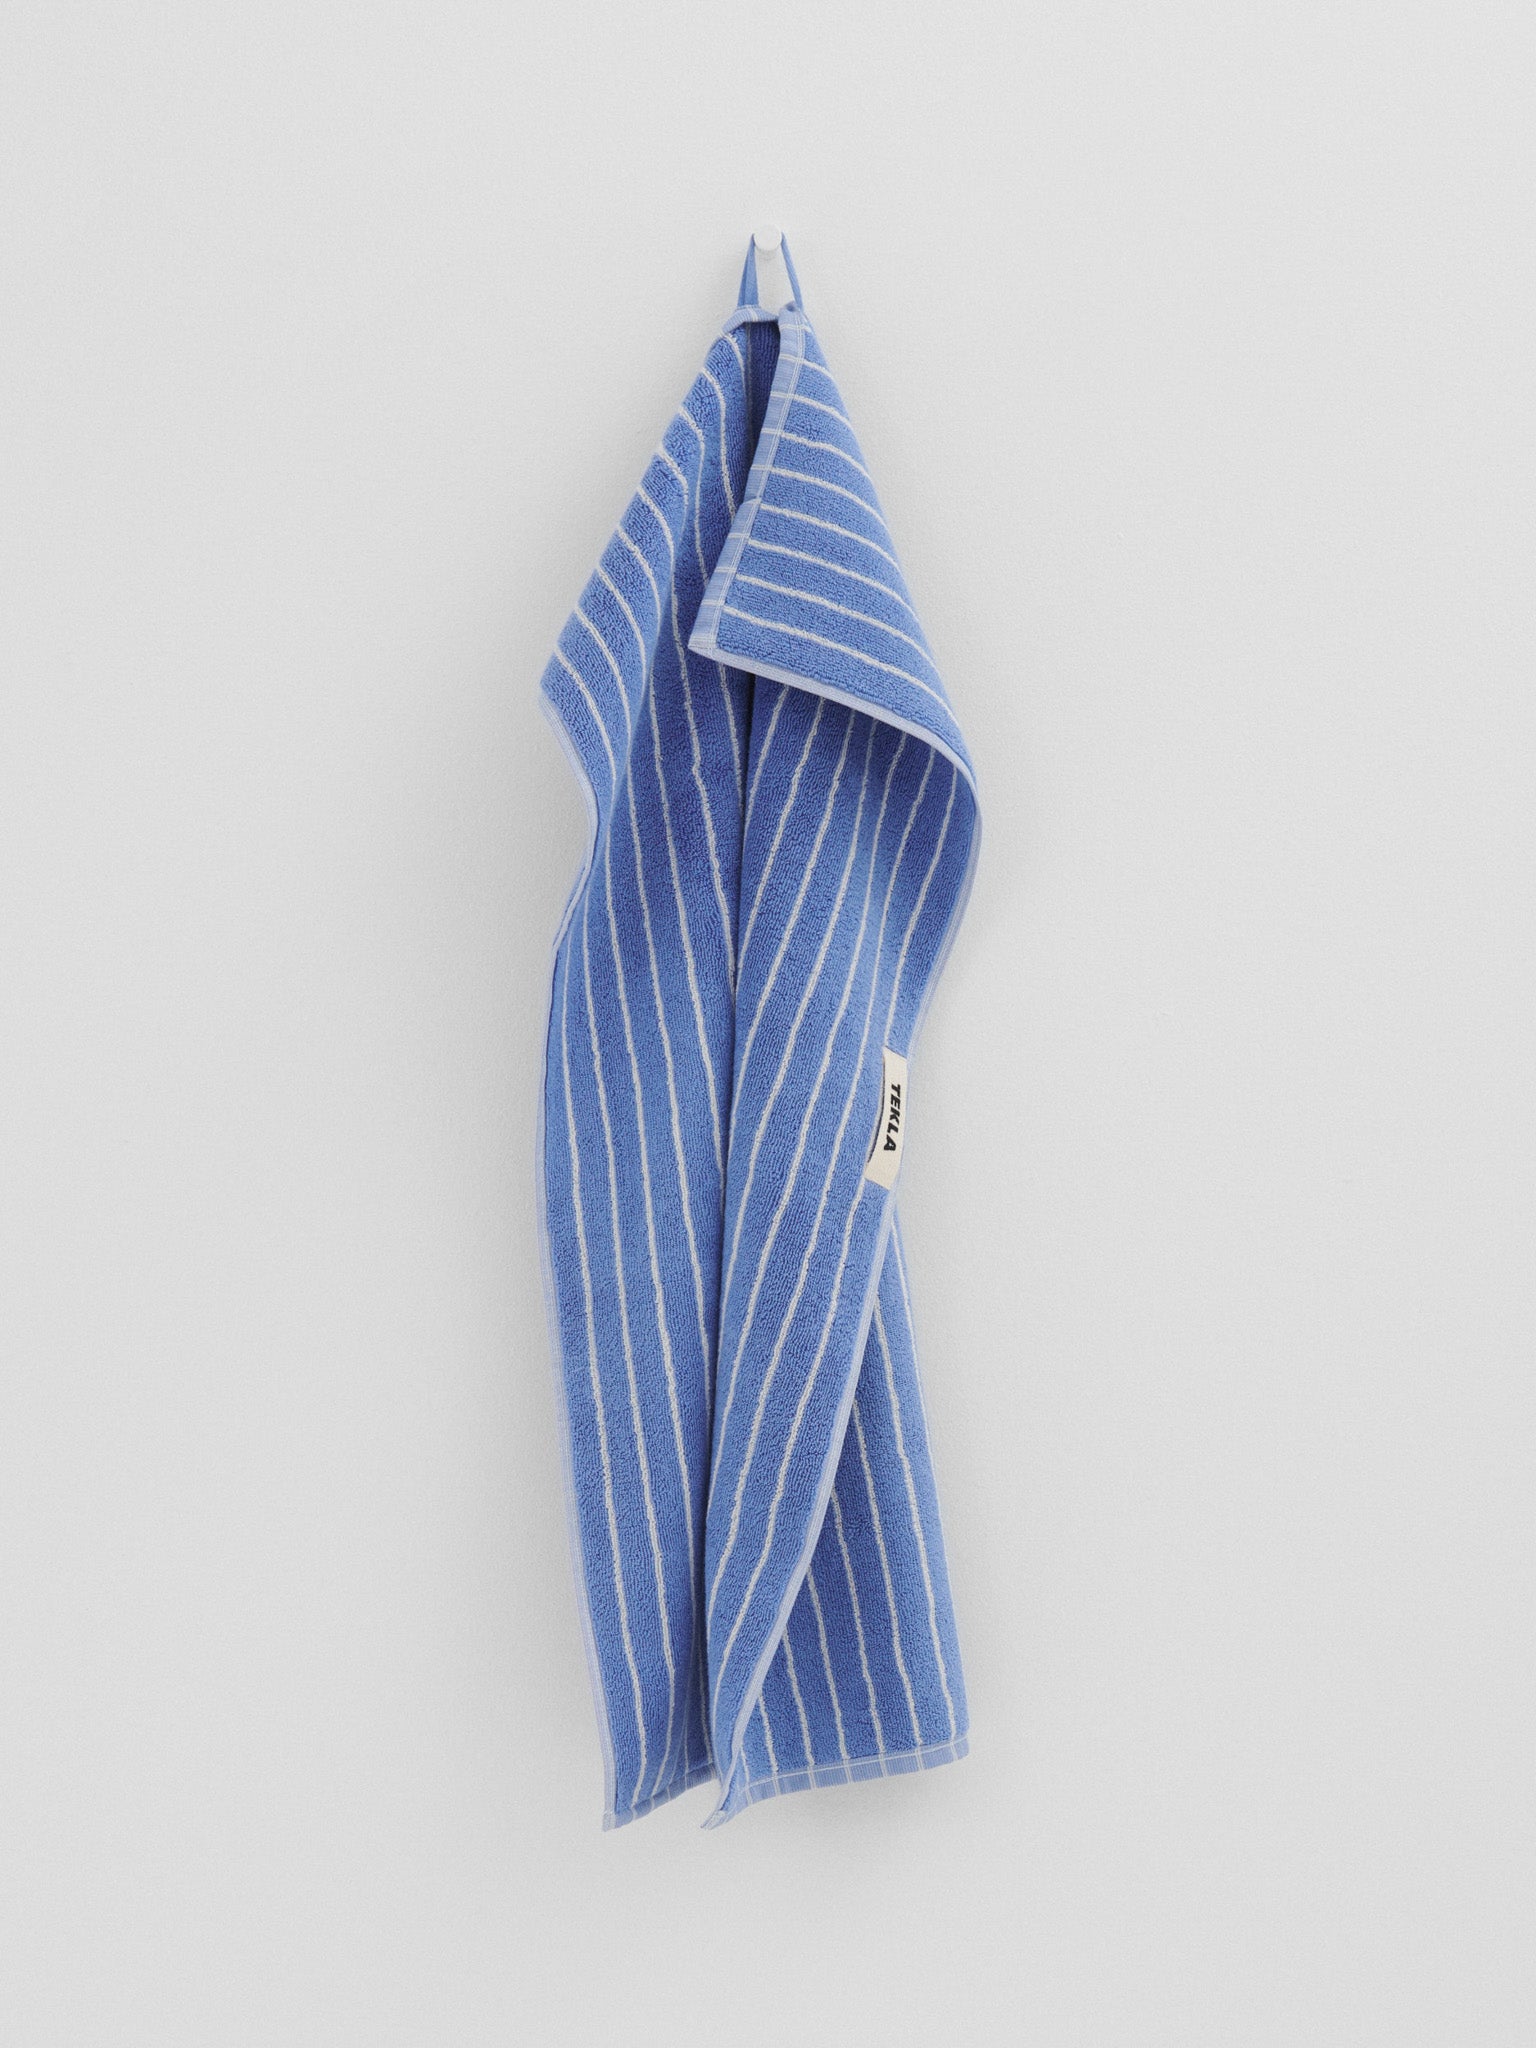 Hand Towel in Clear Blue Stripes